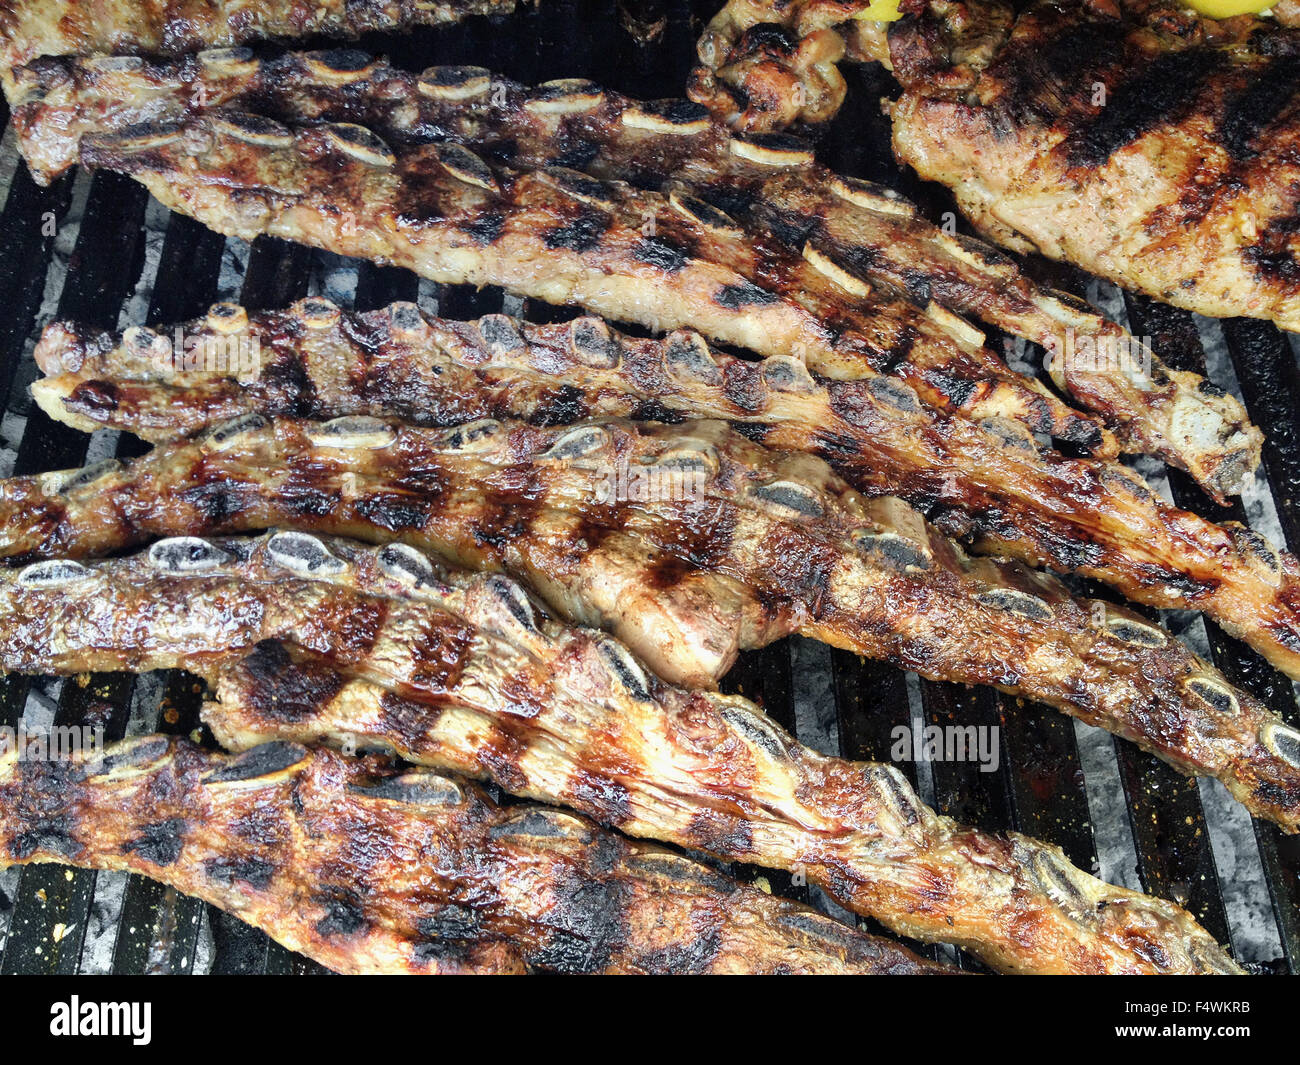 Authentic Argentina Argentinian home made asado parrilla barbecue Stock Photo